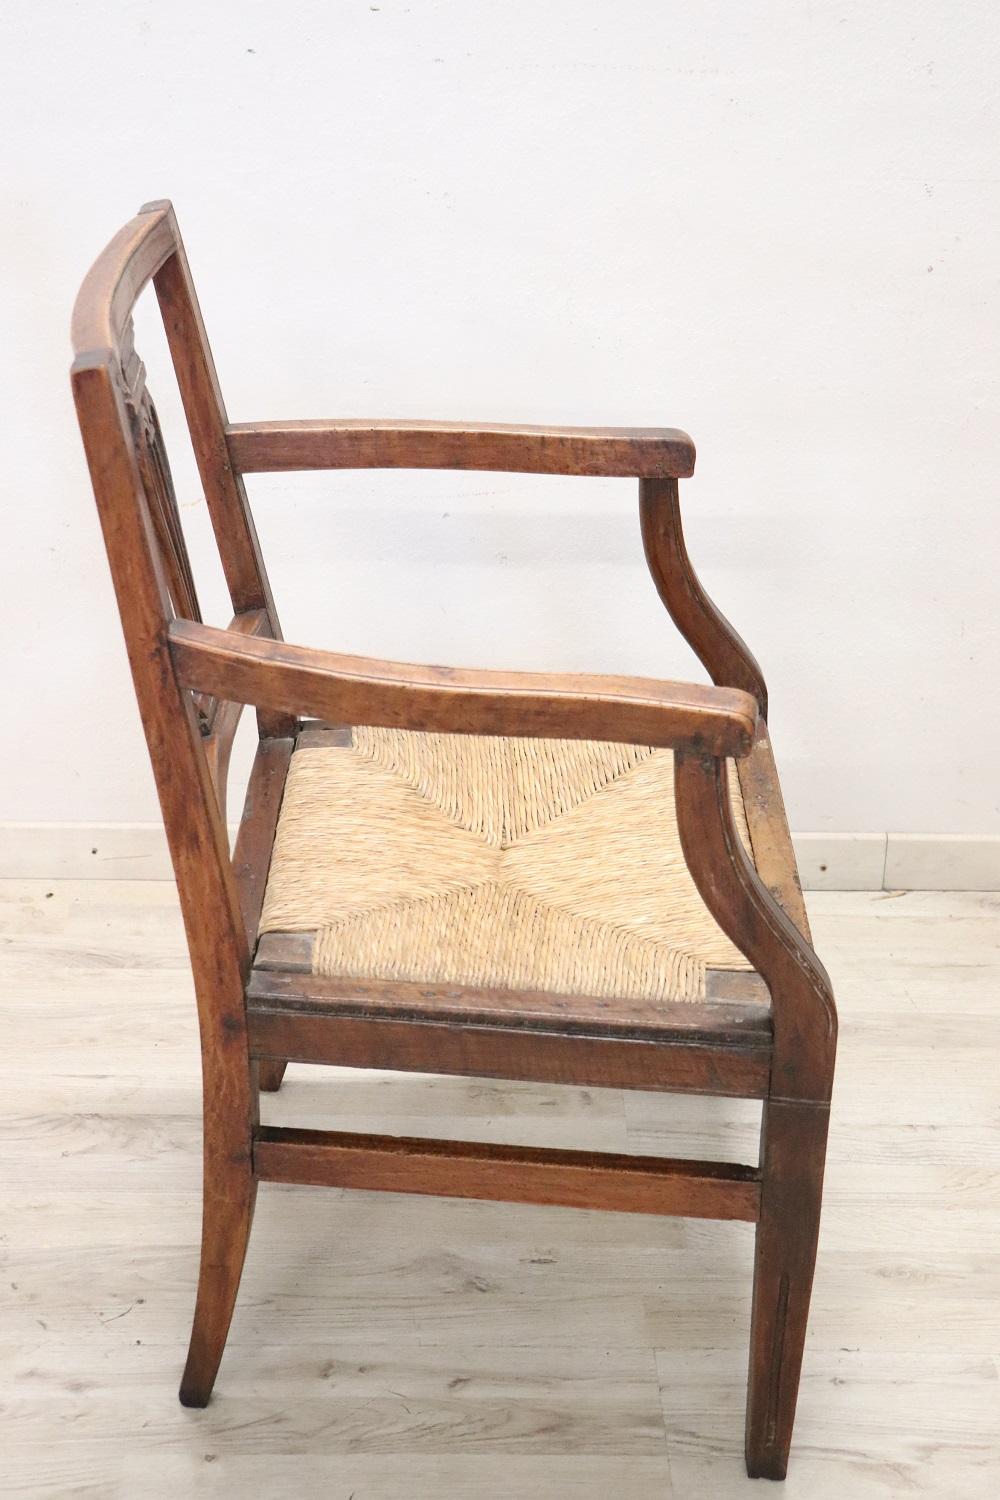 Italian 18th Century of the Period Louis XVI Solid Walnut Armchair with Straw Seat For Sale